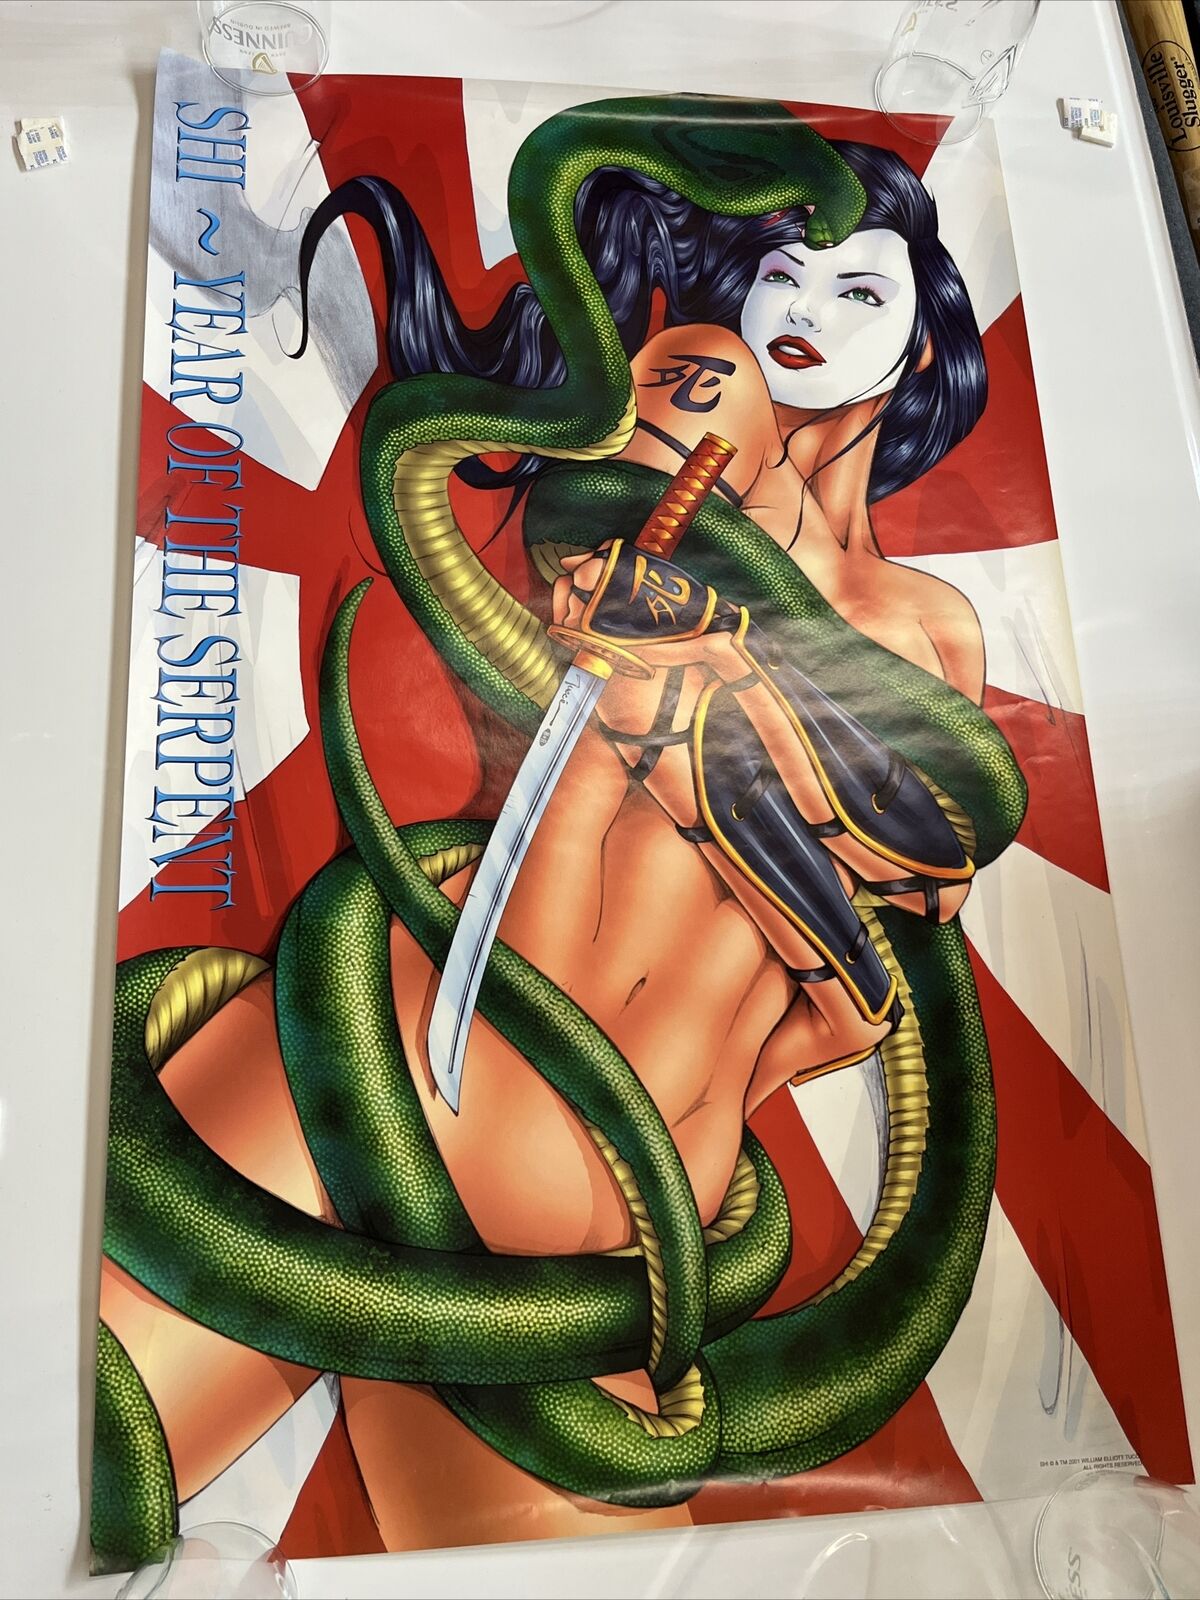 VINTAGE SHI YEAR OF THE SERPENT Cover Art, 1996  Poster Tucci 22\